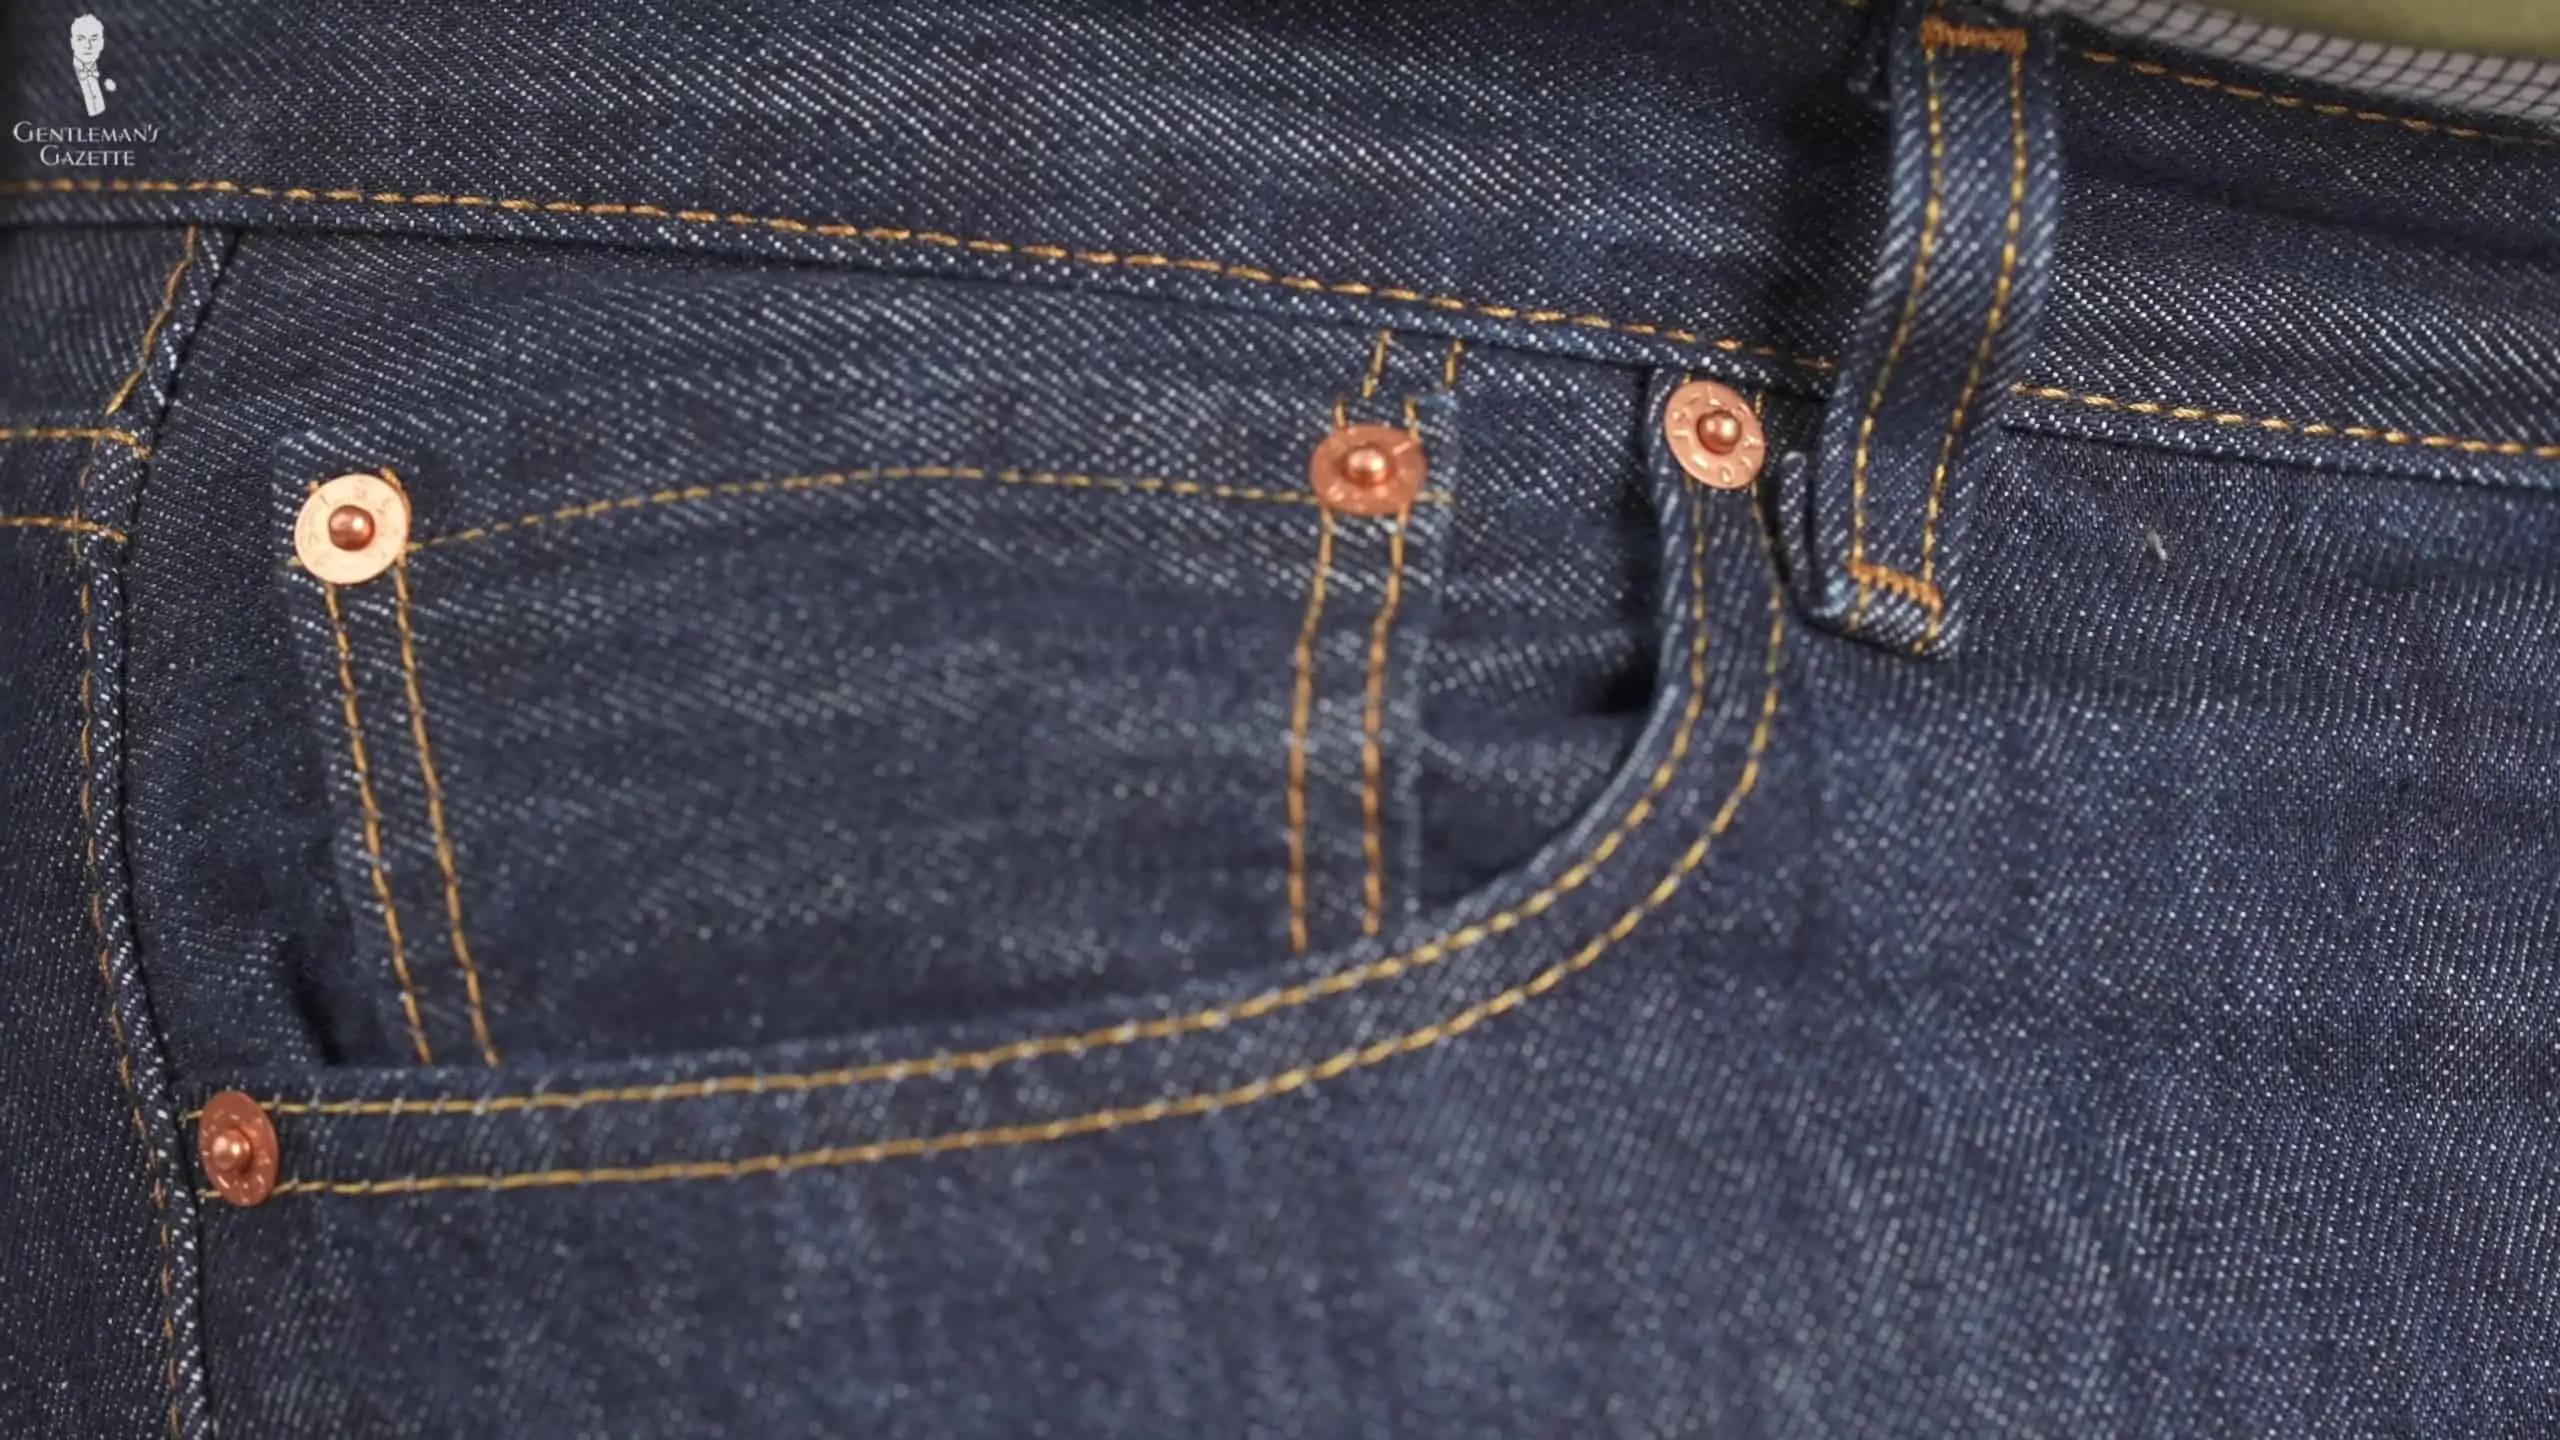 Levi's 501 Jeans: Are They Worth It? (In-Depth Review)